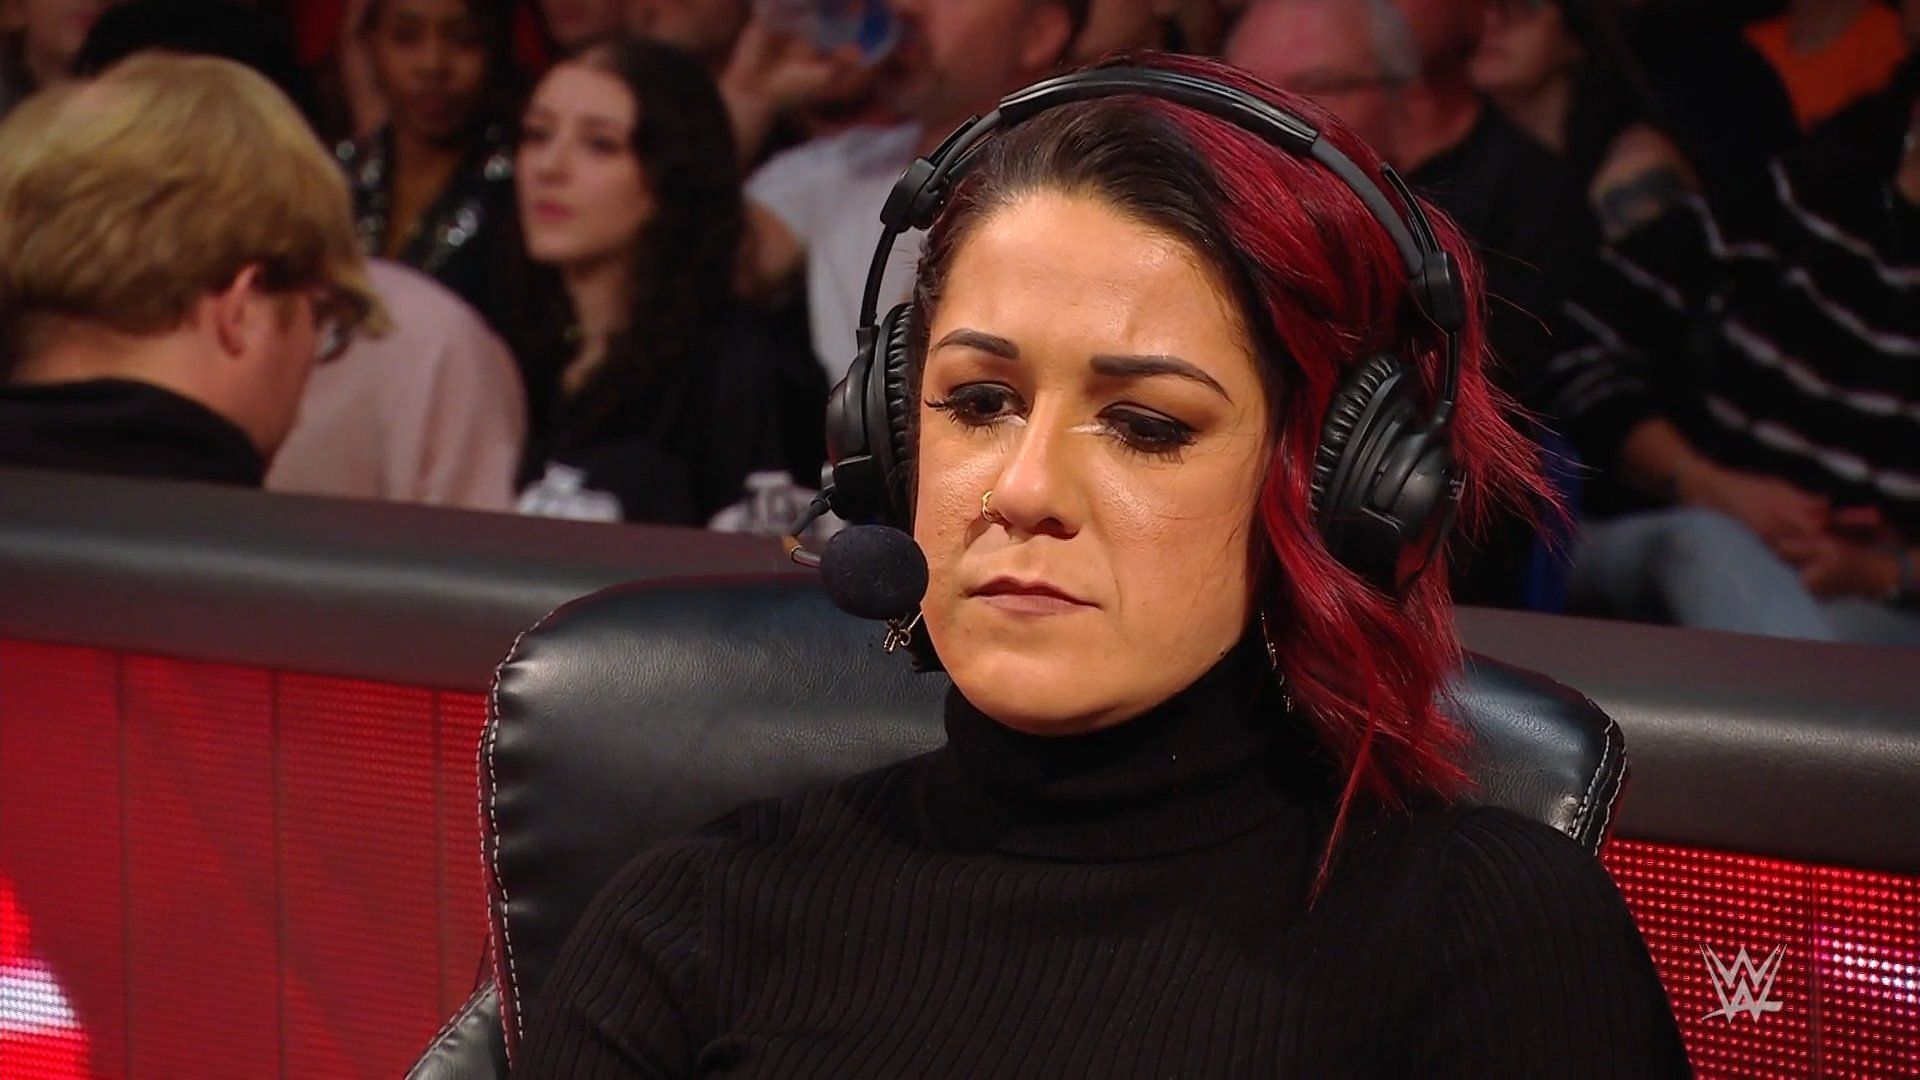 Bayley is a three-time WWE Women